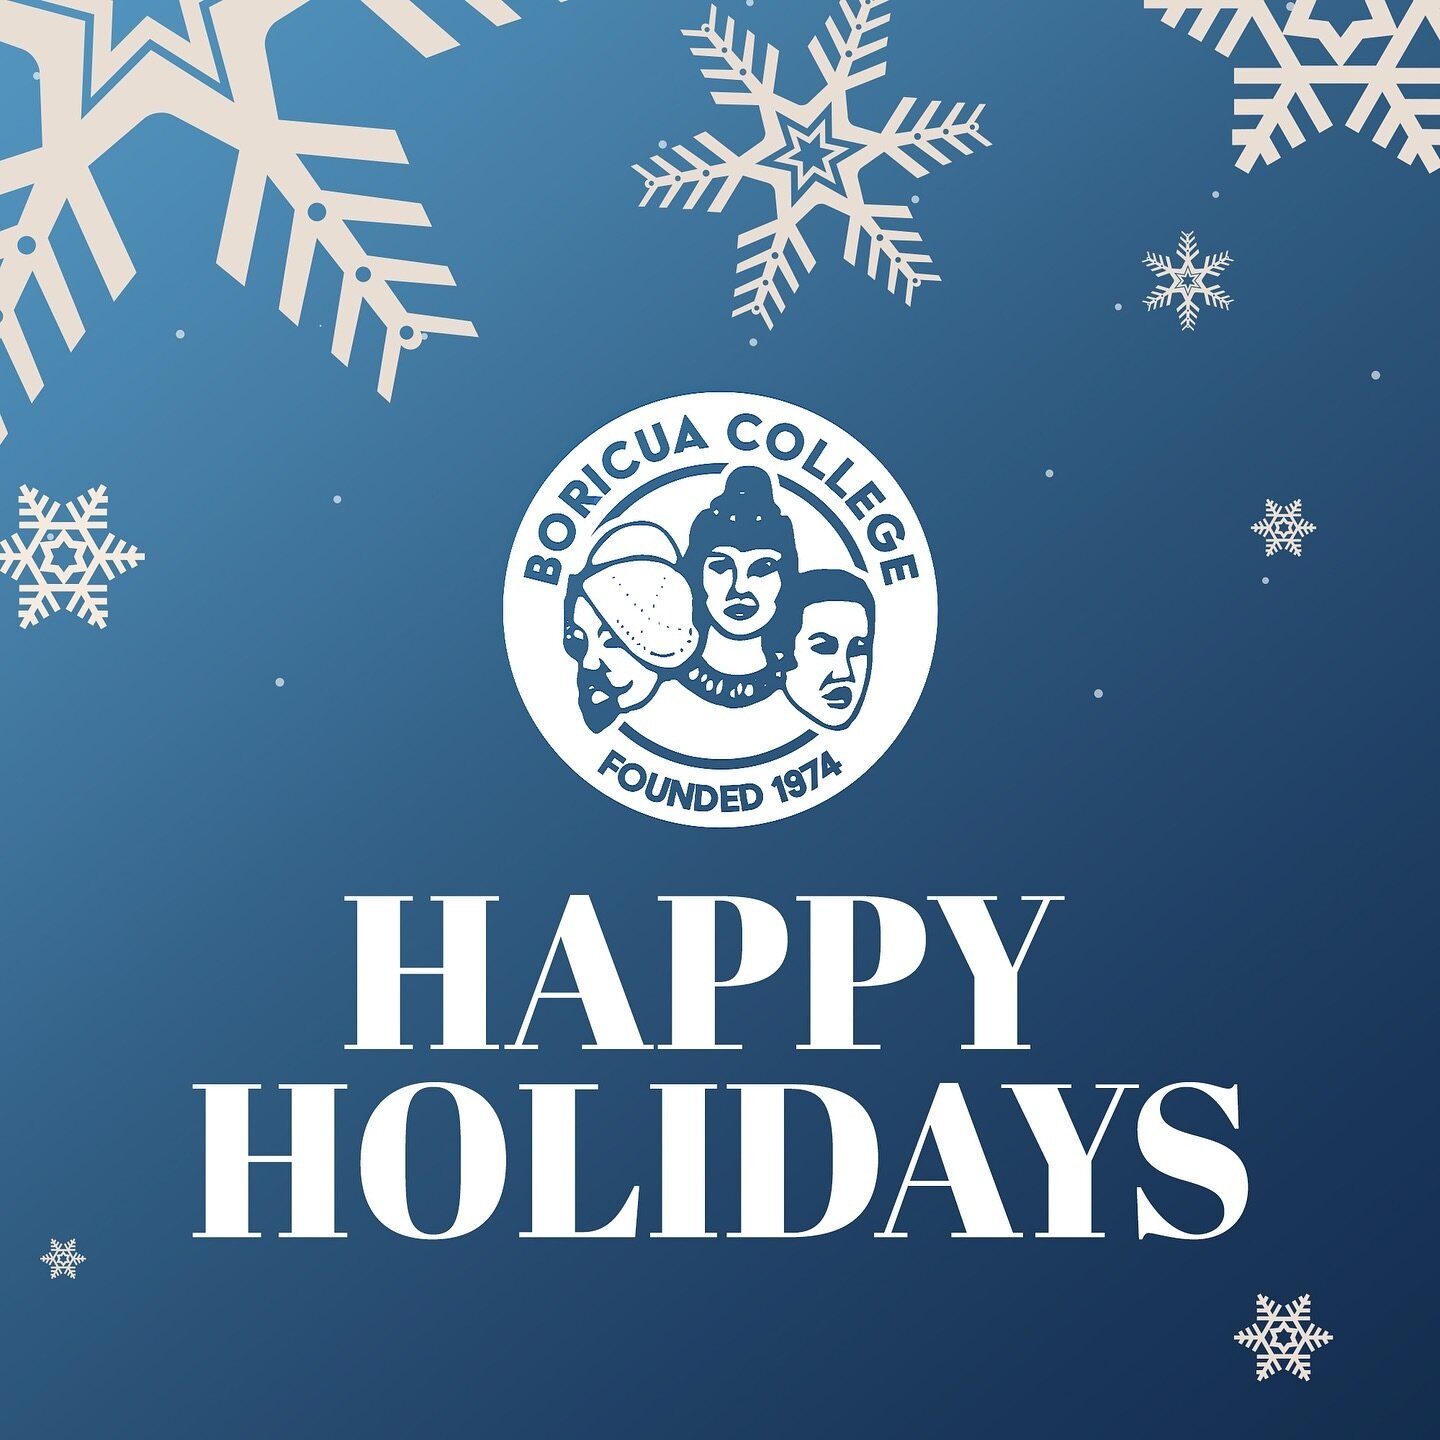 Happy Holidays from the Boricua College family!